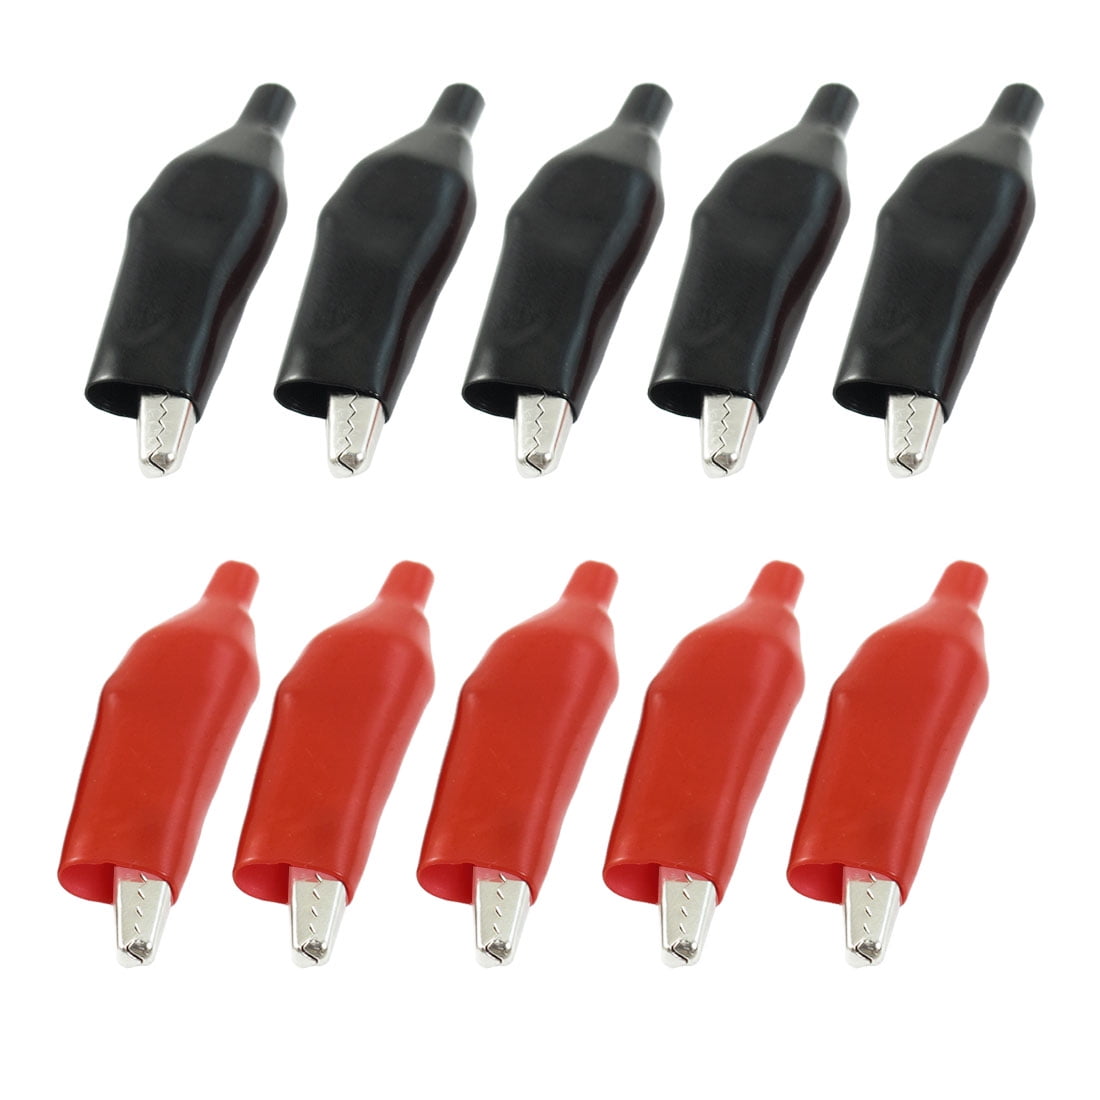 1 Handle Insulated Red!!! 55mm Alligator Clips 10 pieces 